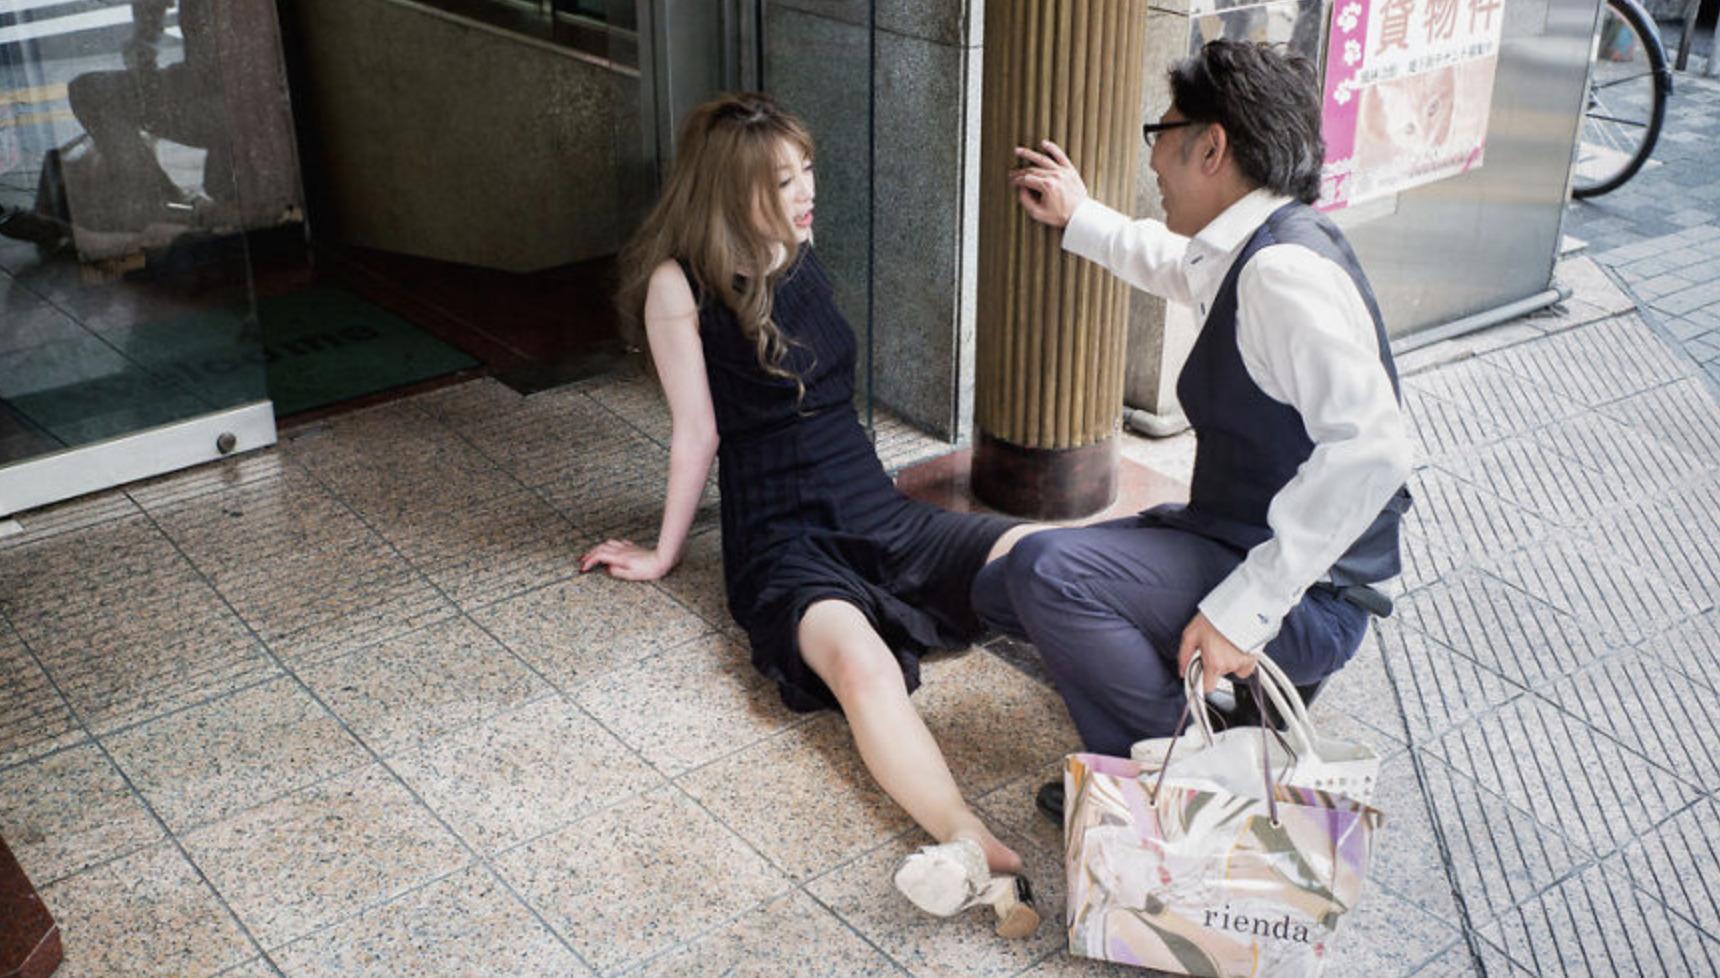 10+ Uncensored Photos Of Drunks In Japan Show The Nasty Side Of Alcohol